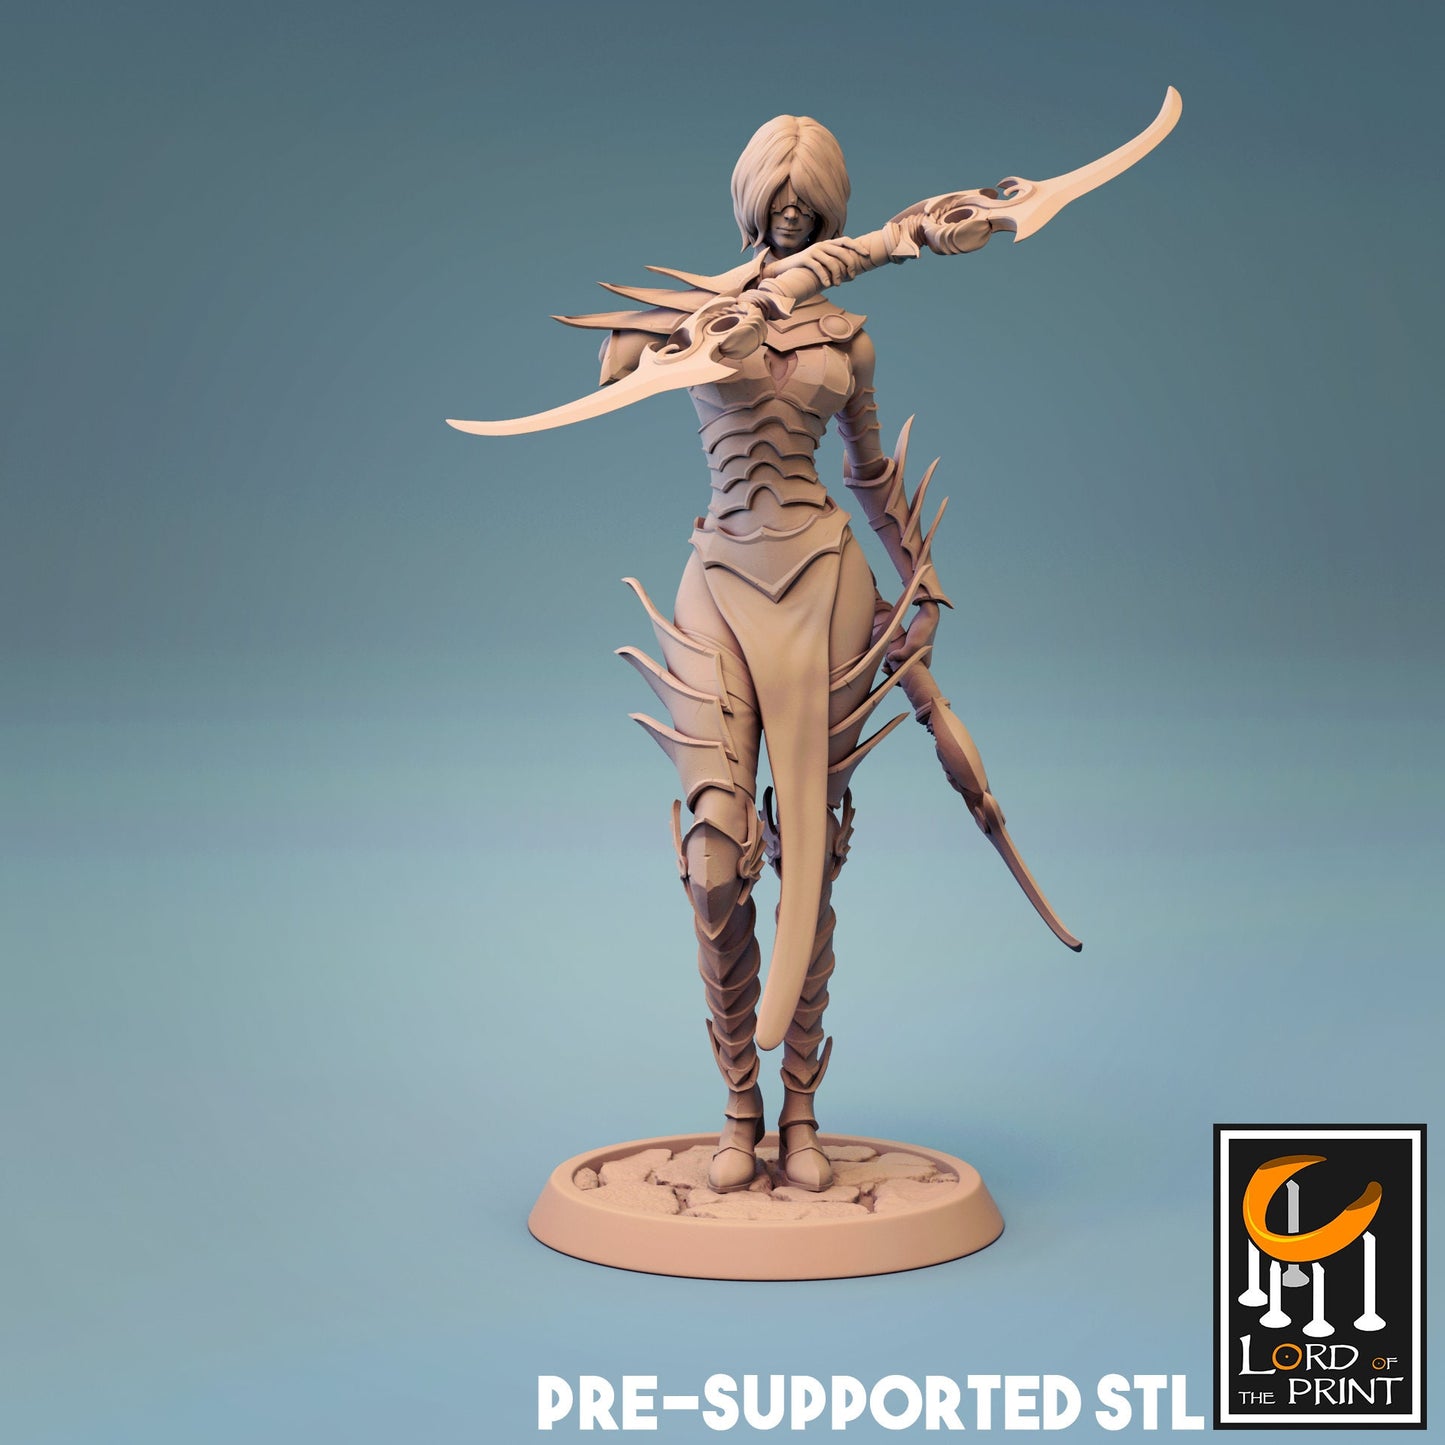 Female Human Fighter with Warglaives D&D miniature, by Lord of the Print // 3D Print on Demand / DnD / Pathfinder / RPG